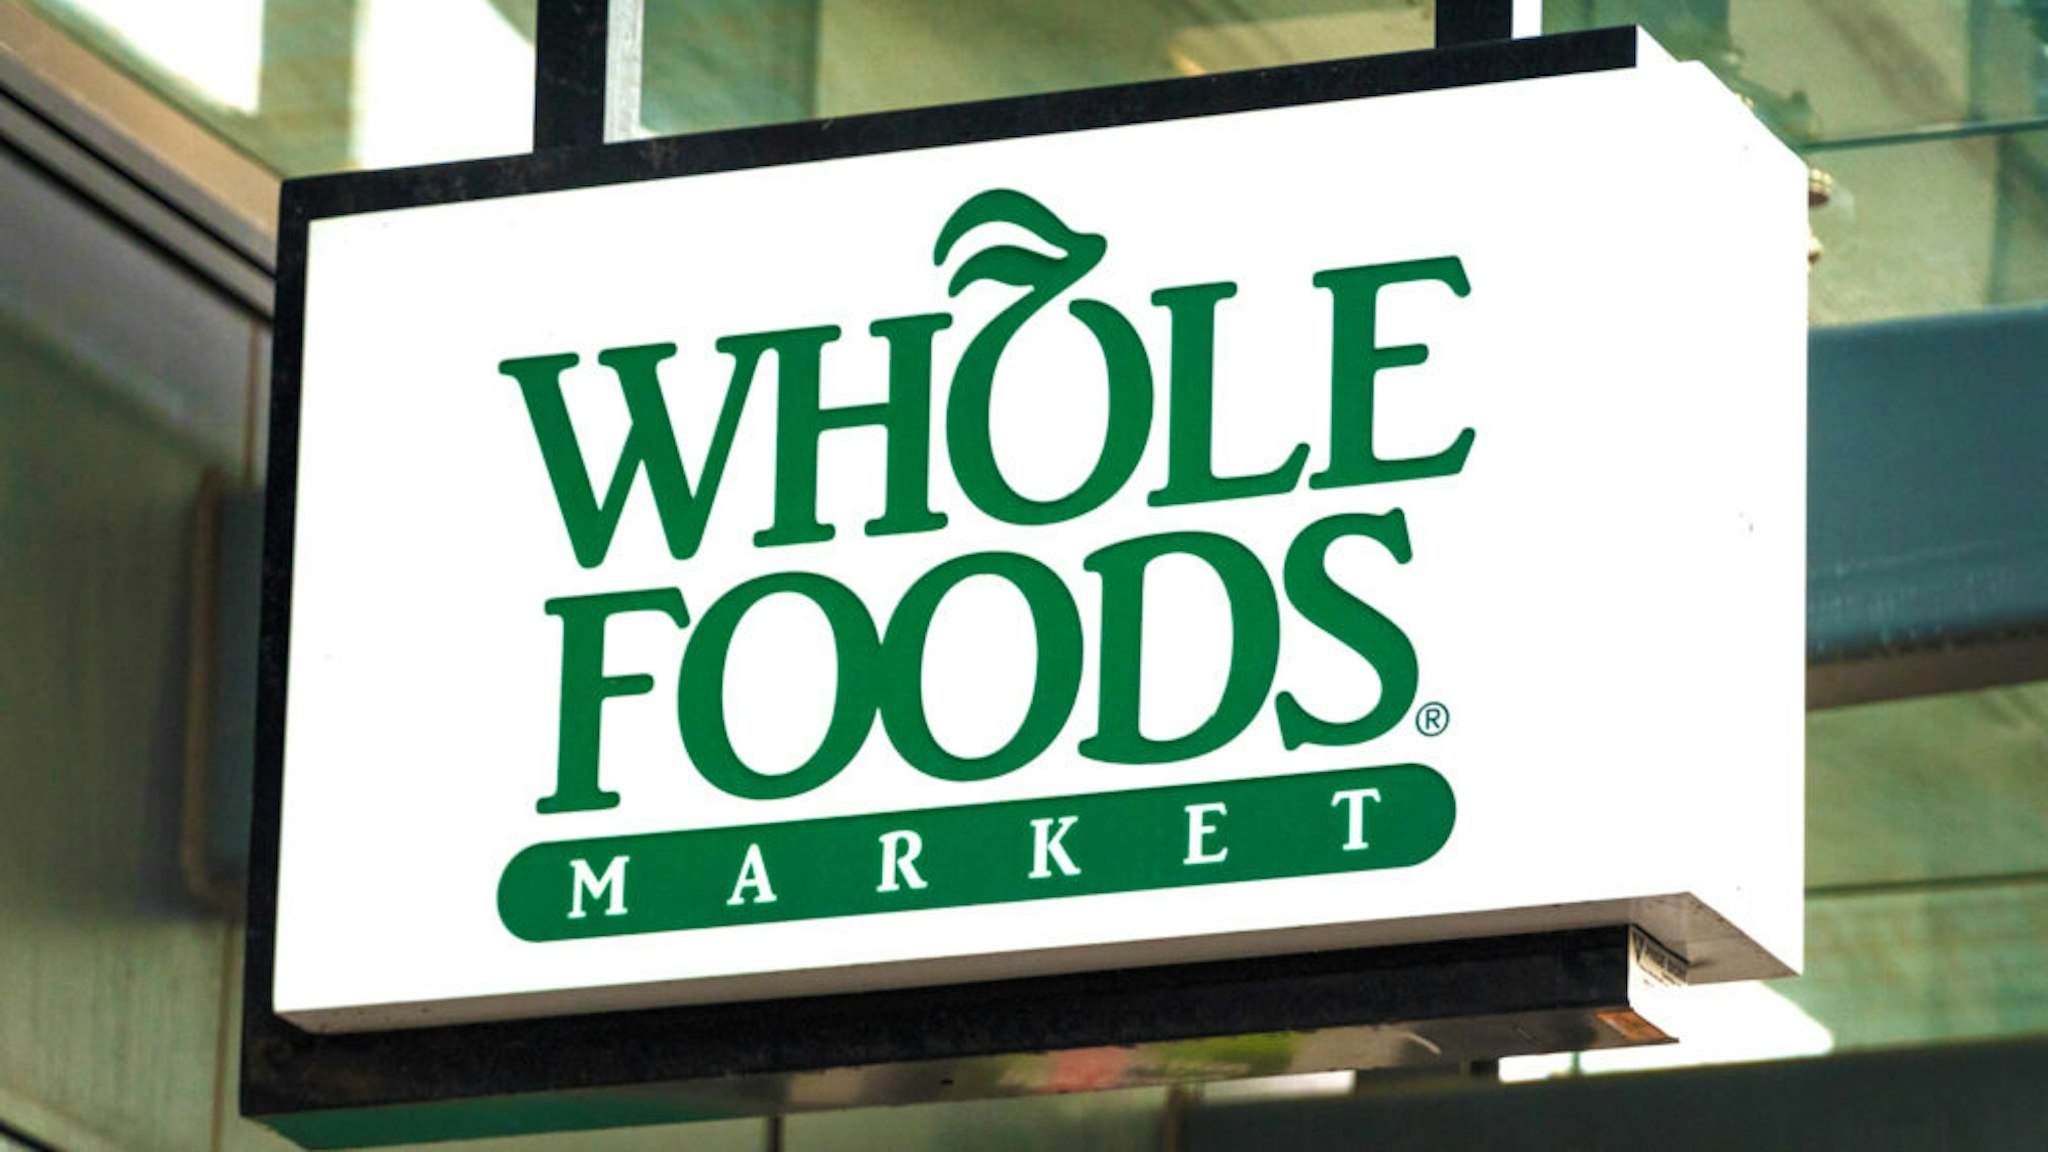 TORONTO, ONTARIO, CANADA - 2017/10/22: Whole Foods sign hanging on a store entrance in Yonge Street. The company was recently acquired by Amazon.